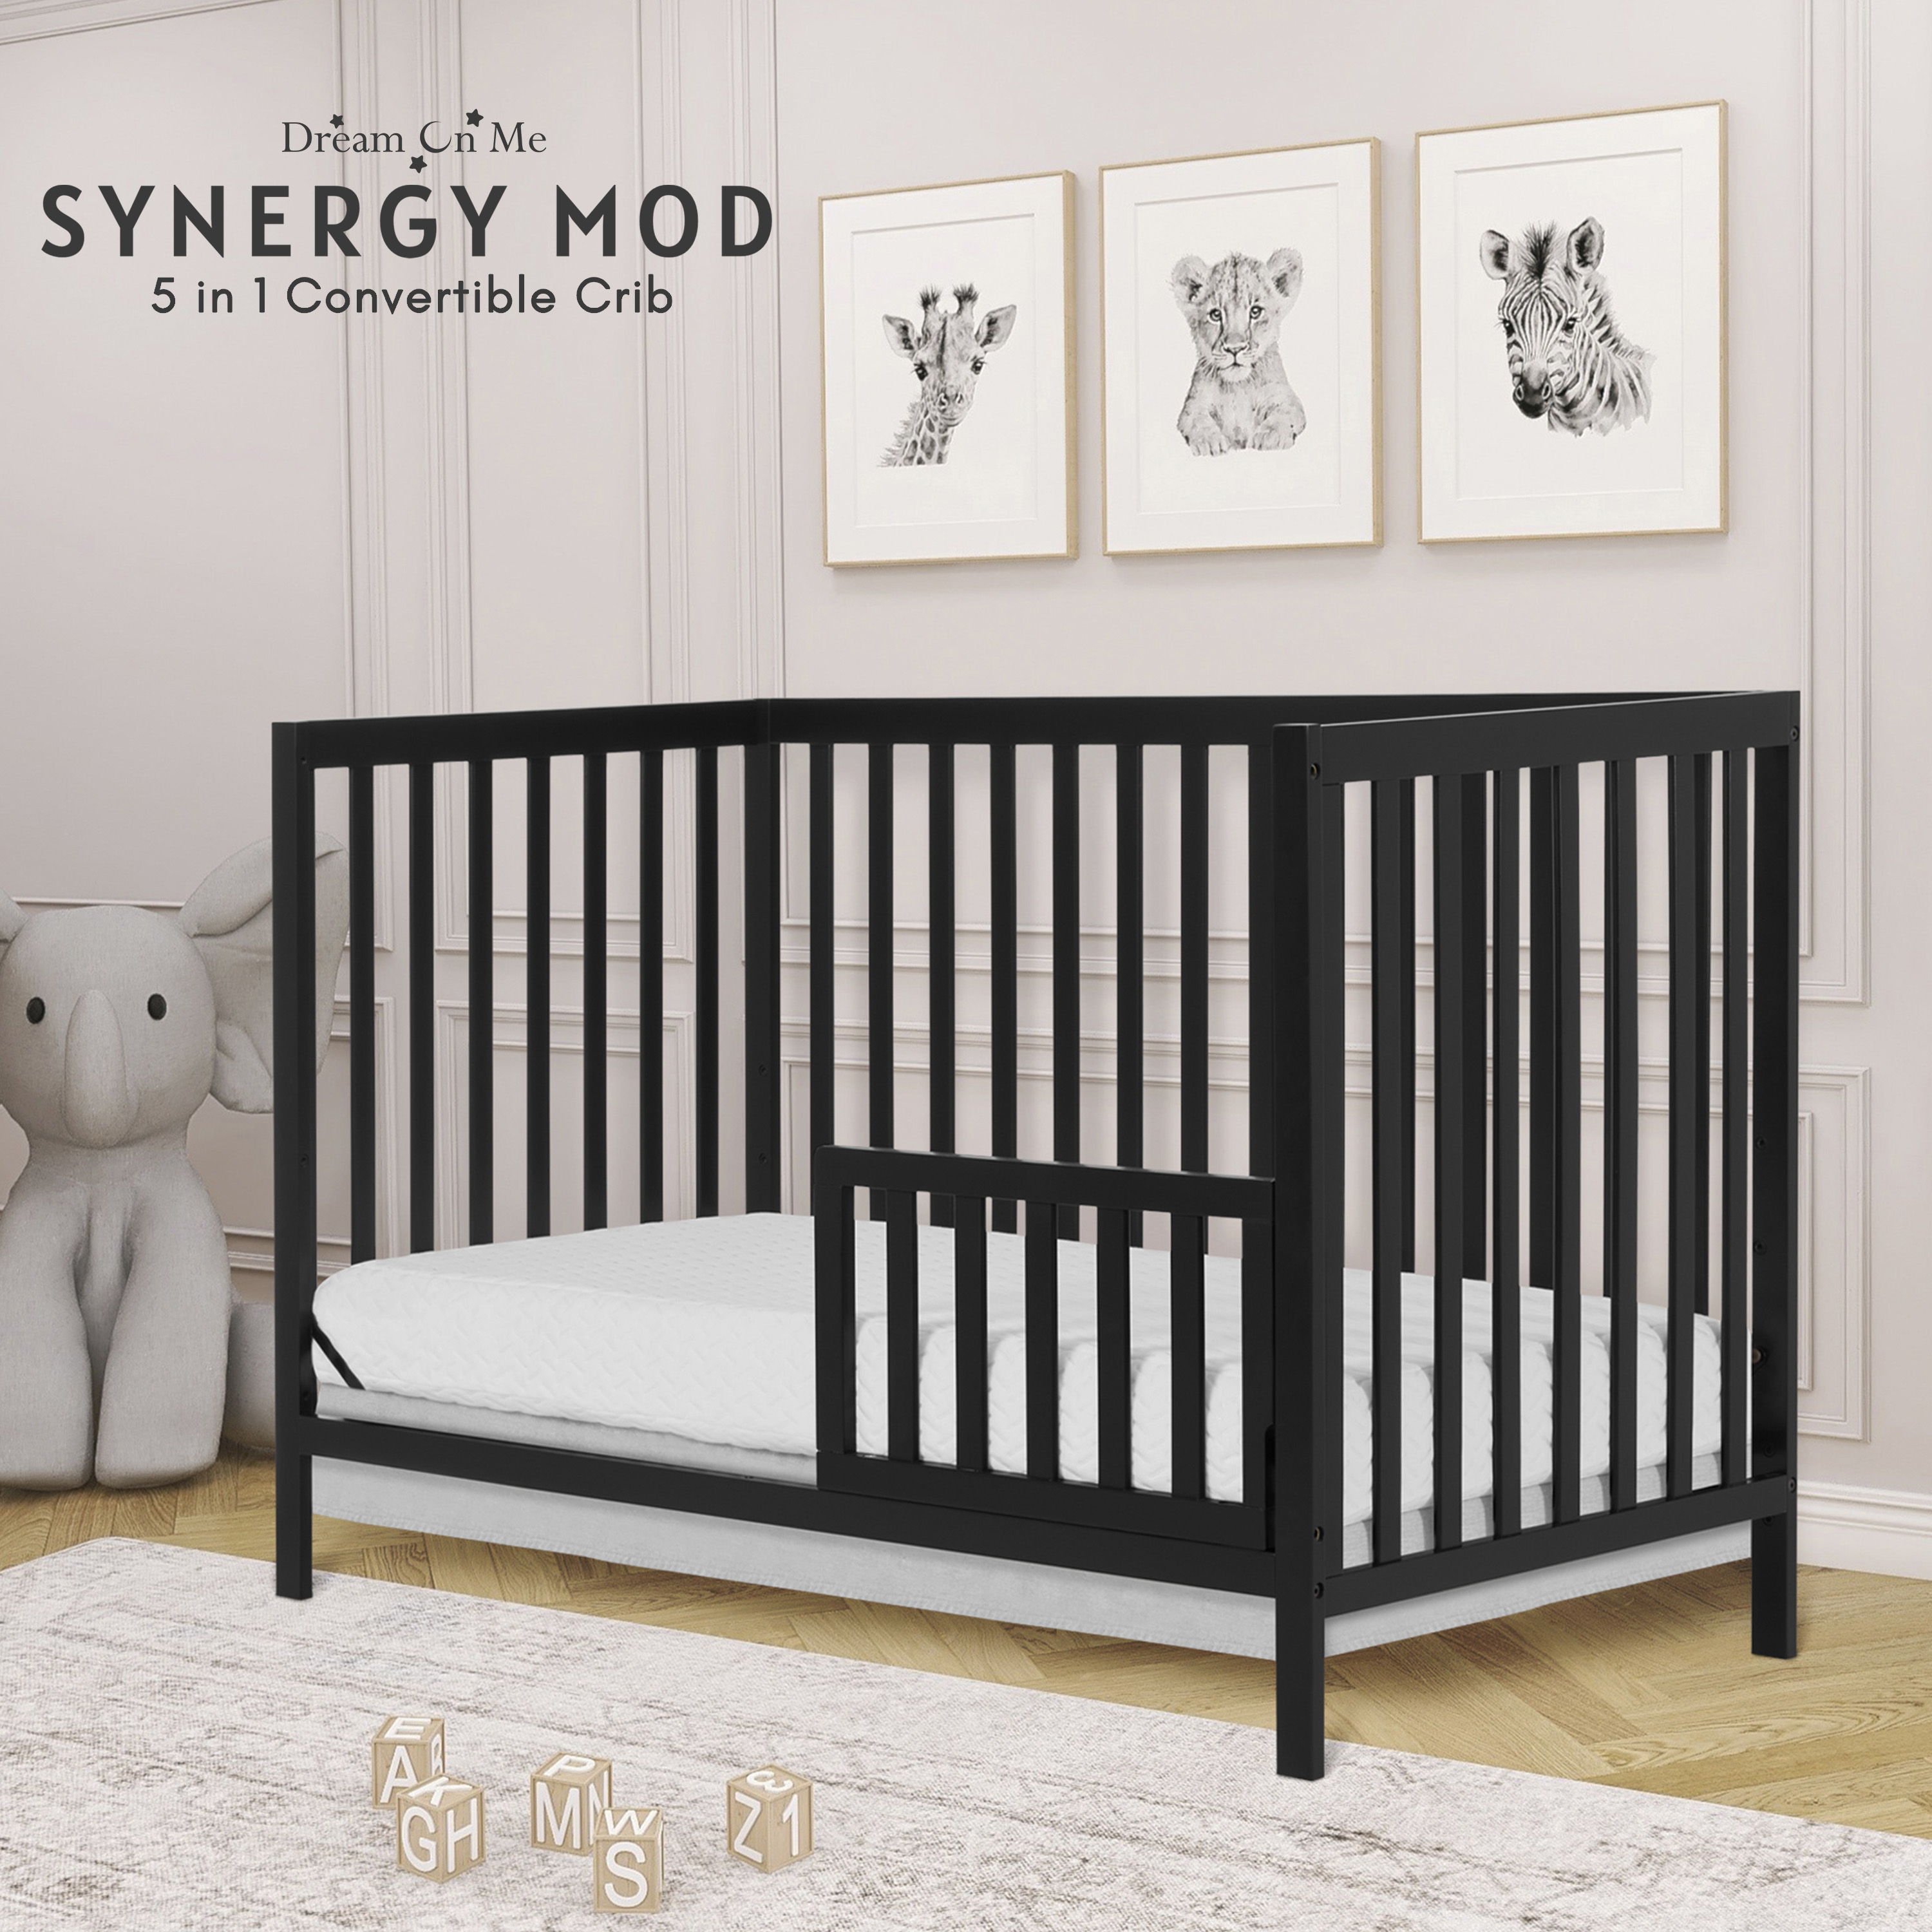 Dream On Me Synergy MOD Crib, Made with Sustainable New Zealand Pinewood, Matte Black - image 4 of 9